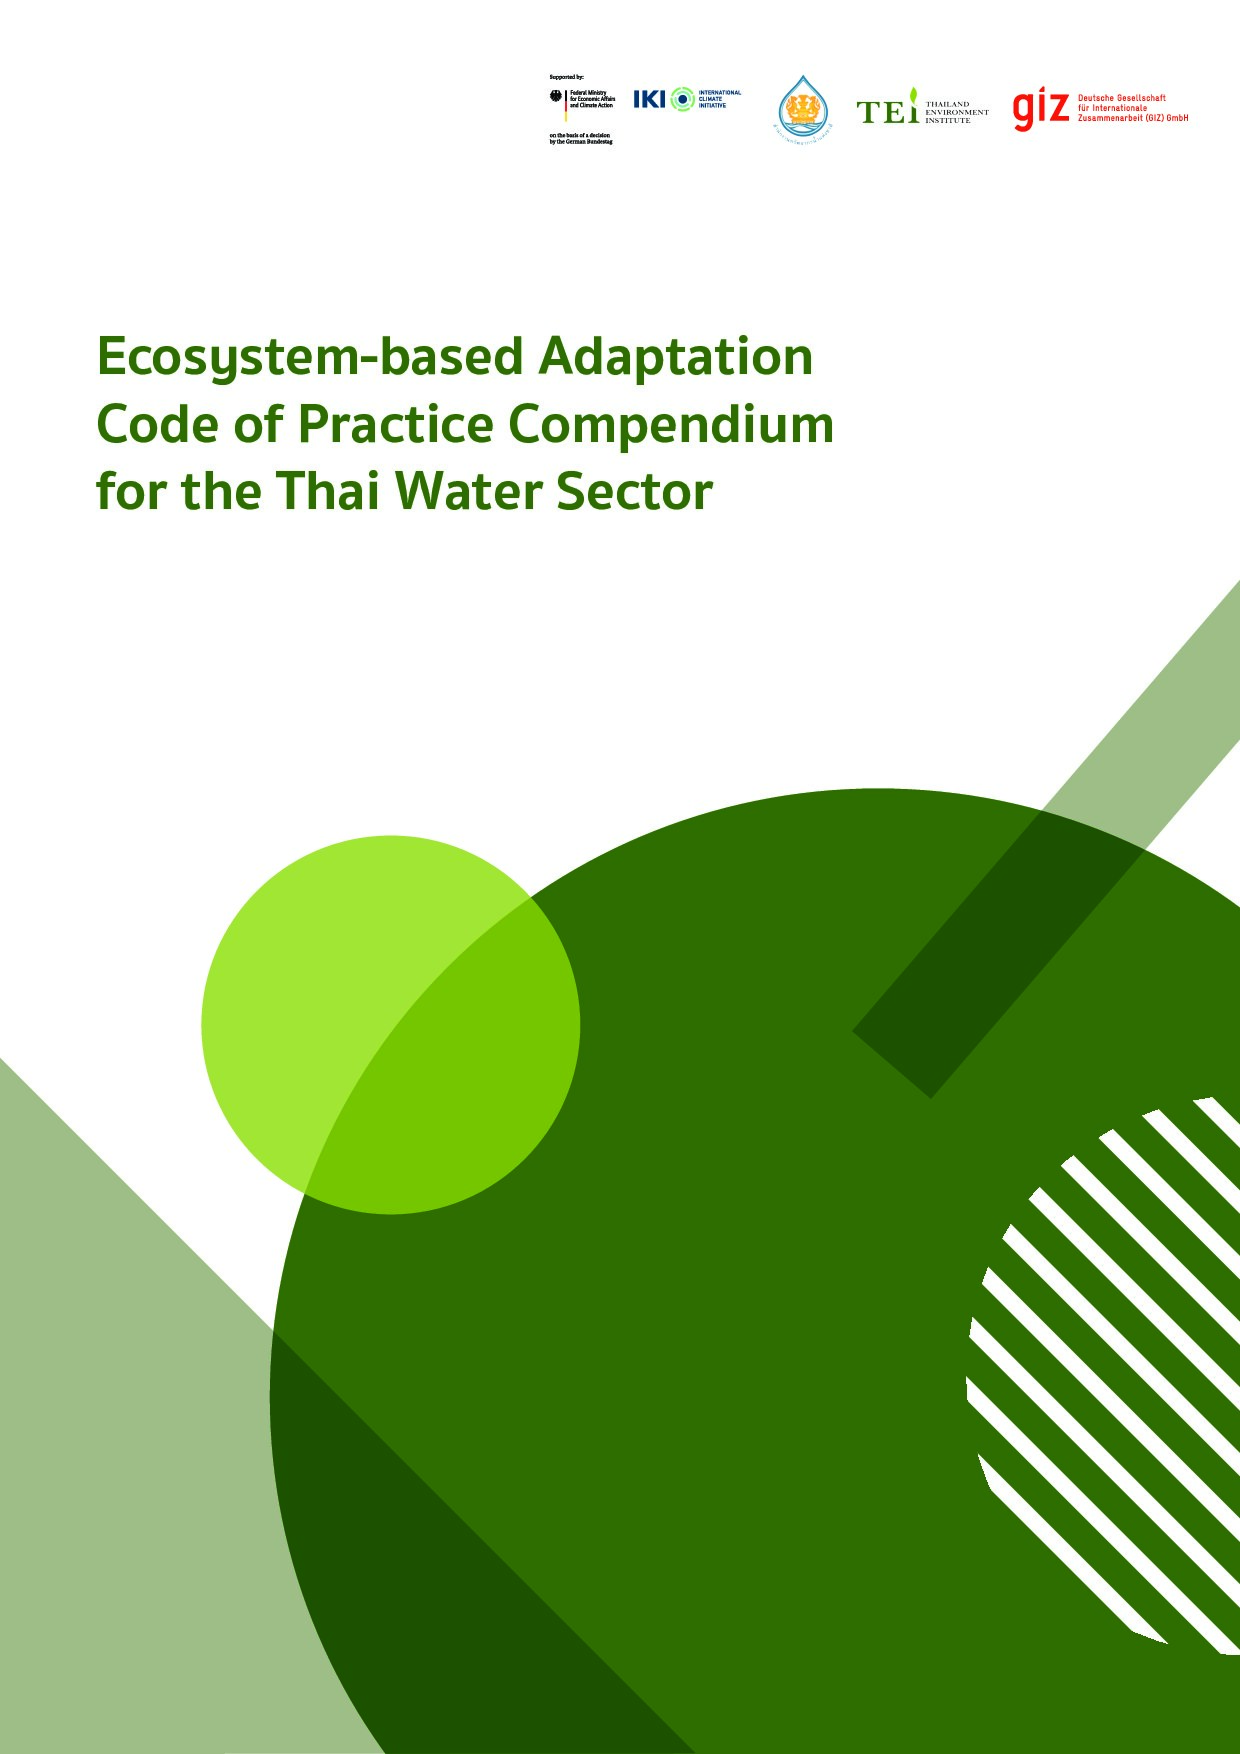 Ecosystem-based Adaptation Code of Practice Compendium for the Thai Water Sector